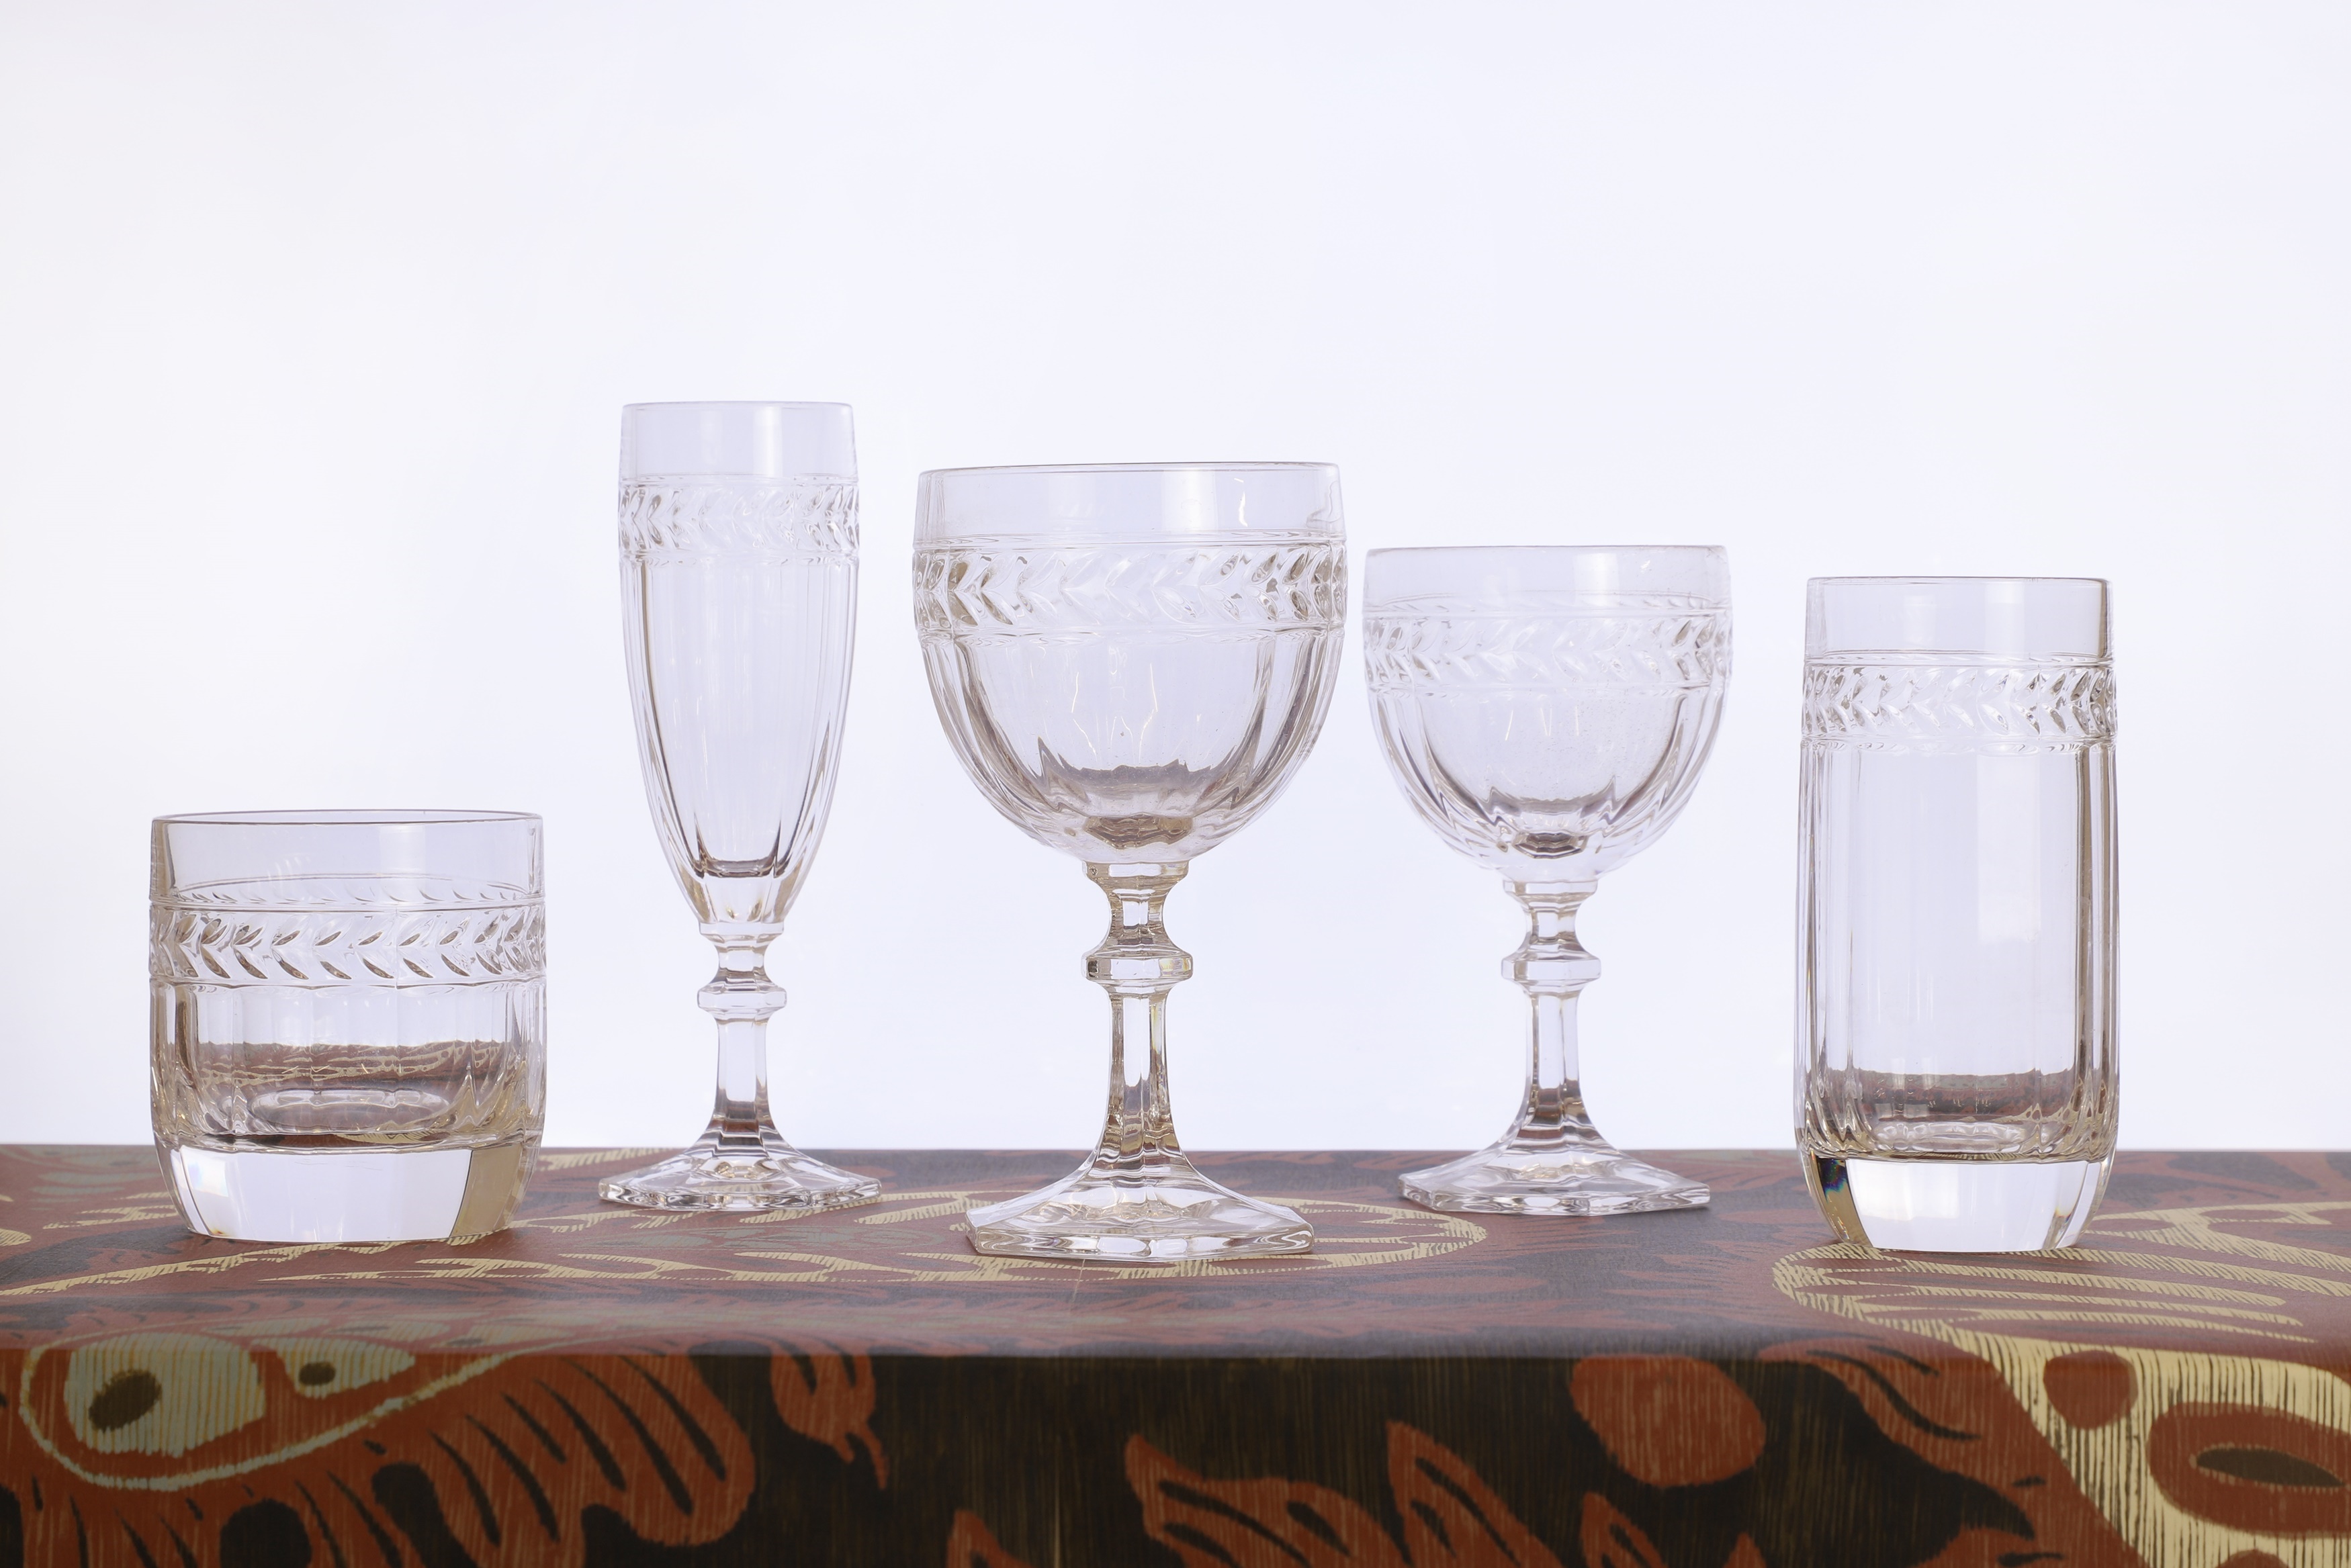 A Villeroy & Boch 'Miss Desiree' glass suite of recent manufacture, each with pressed glass laurel and panel decoration and raised on an hexagonal base (£400-600)